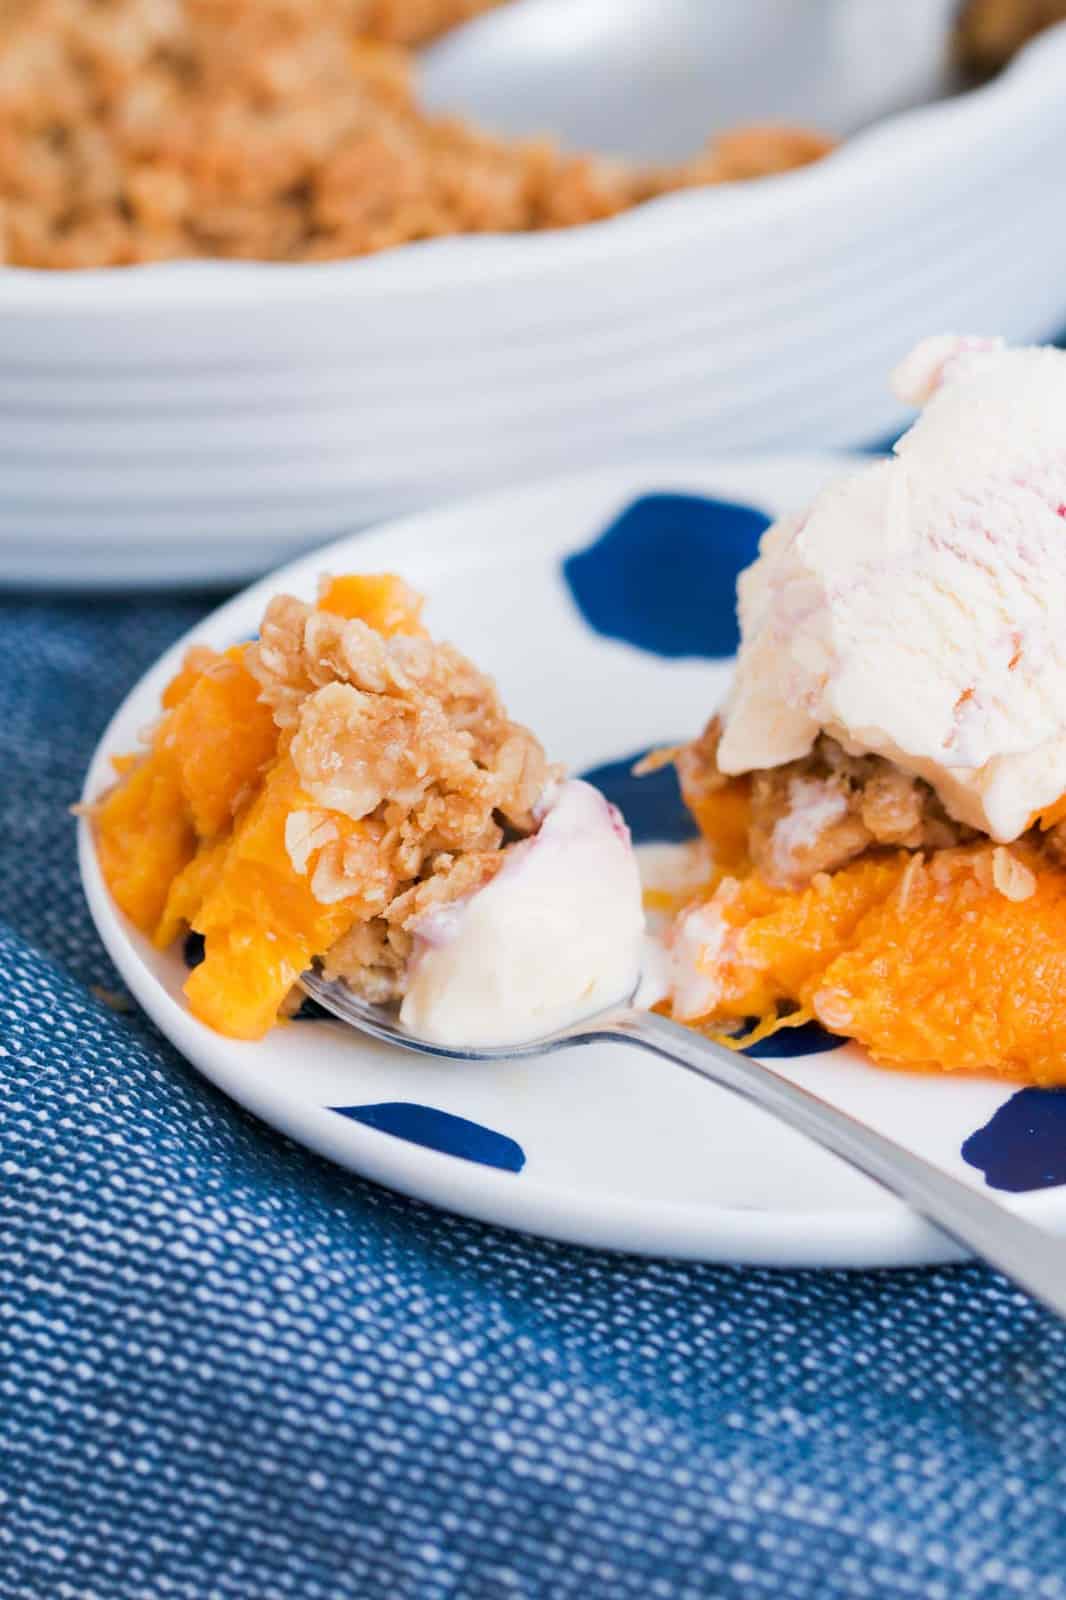 A spoonful of peach and rolled oat streusel on a plate.